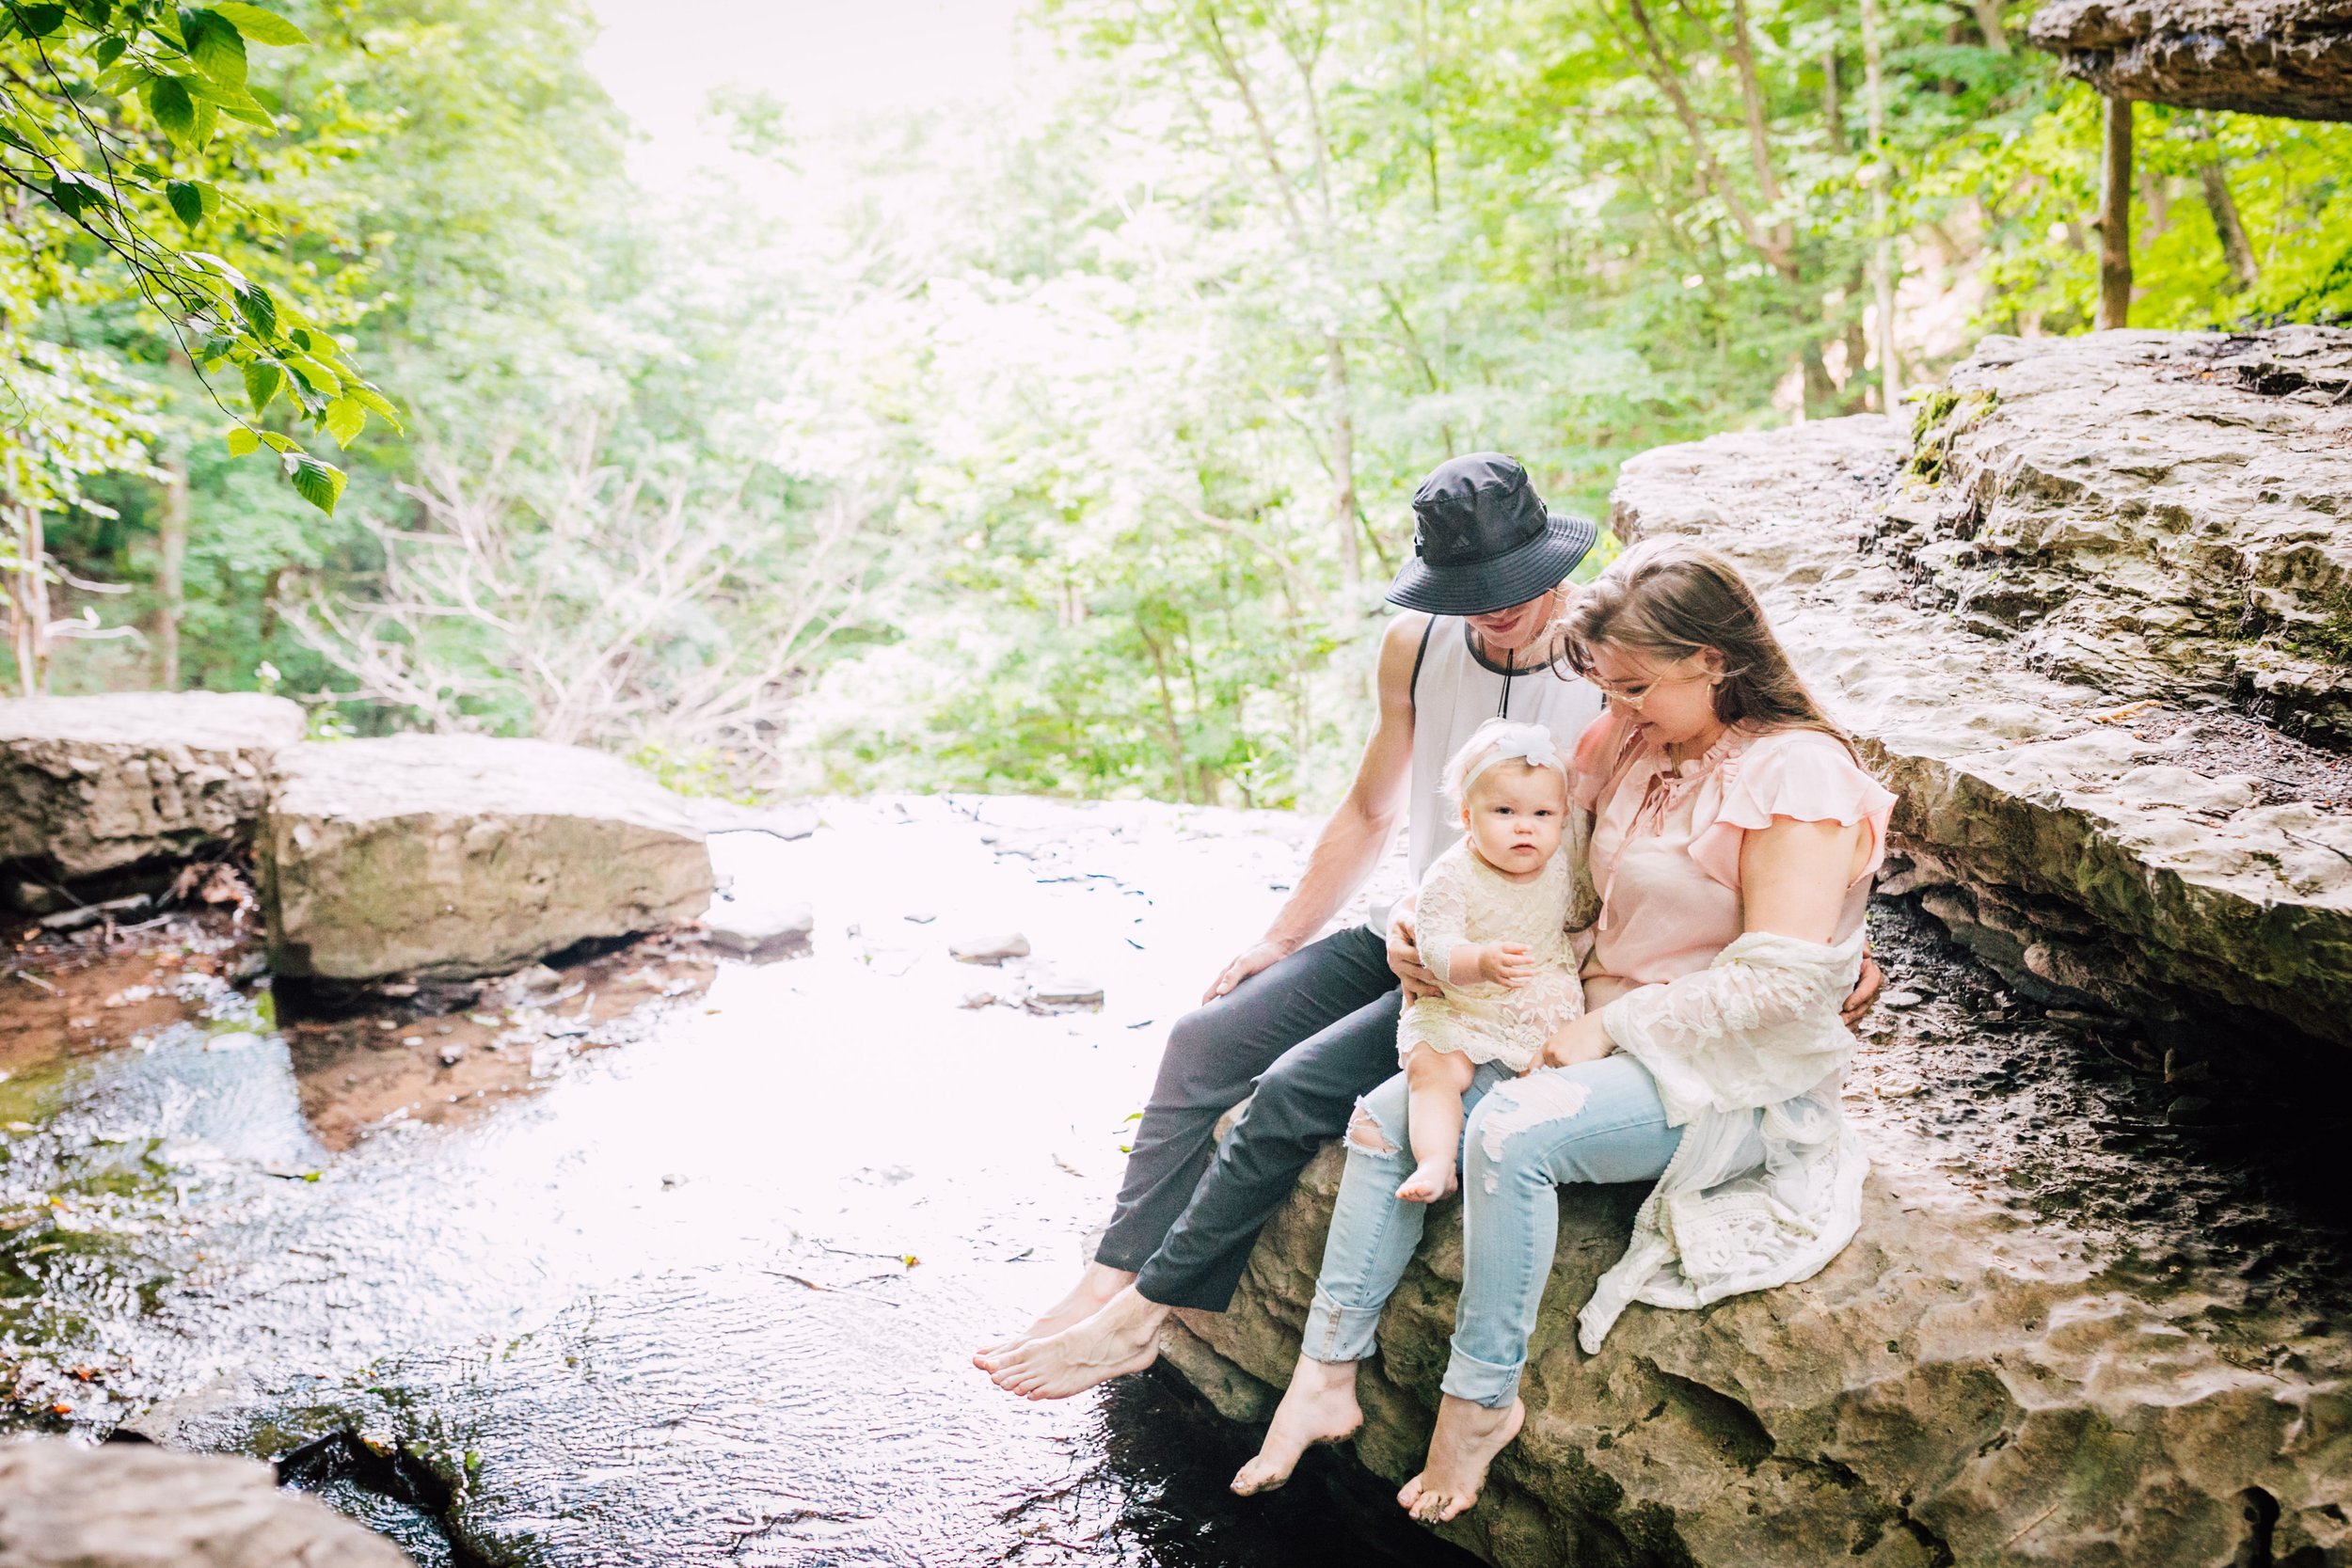  Syracuse family photographer captures family sitting together on a rock near a stream 